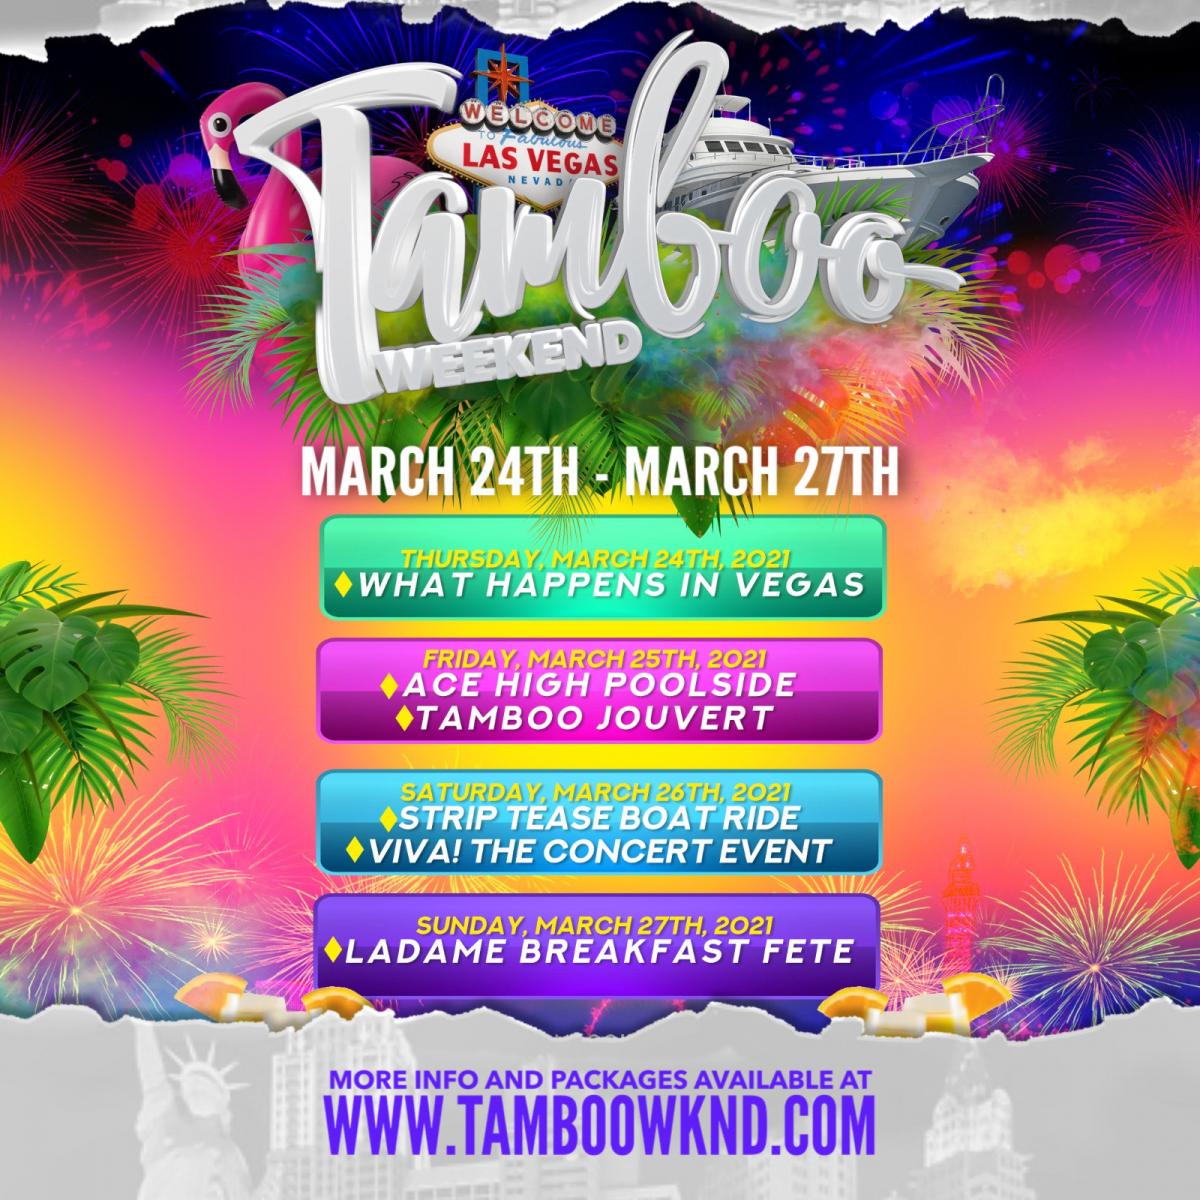 Tamboo Weekend flyer or graphic.